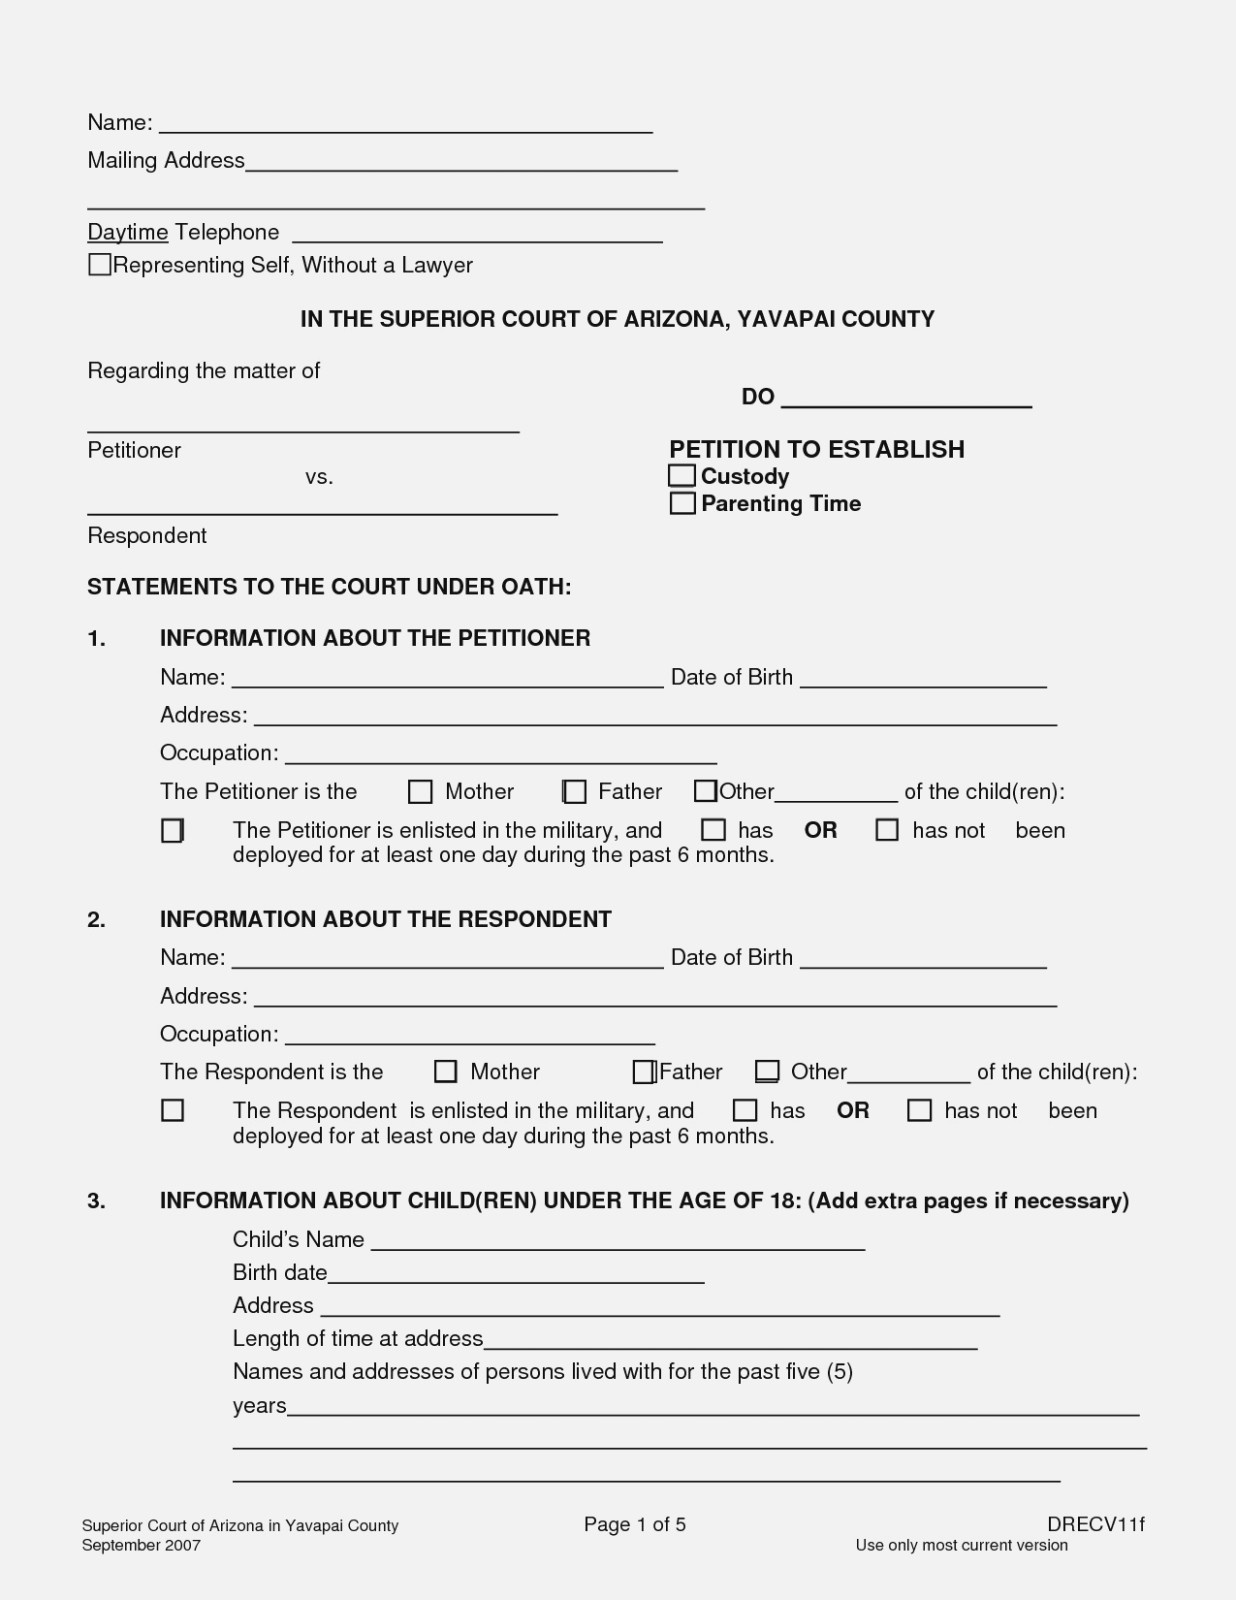 Is Free Printable | Realty Executives Mi : Invoice And Resume - Free Printable Temporary Guardianship Form